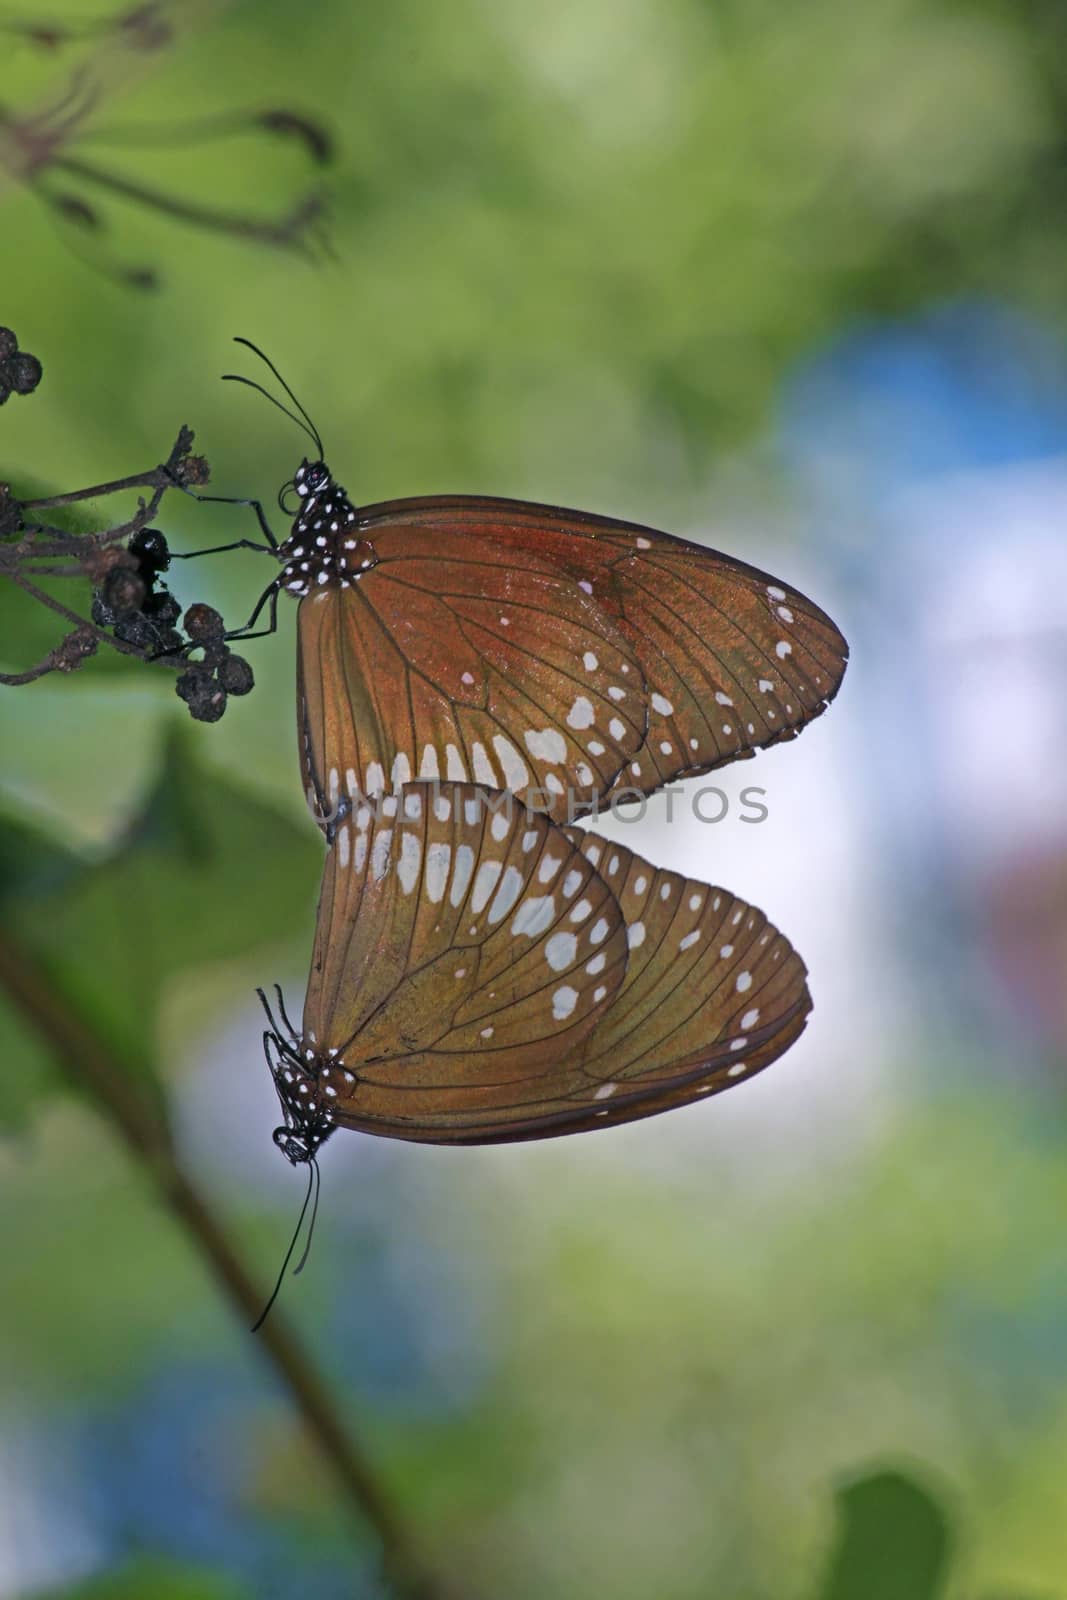 Mating of Common Crow Butterfly